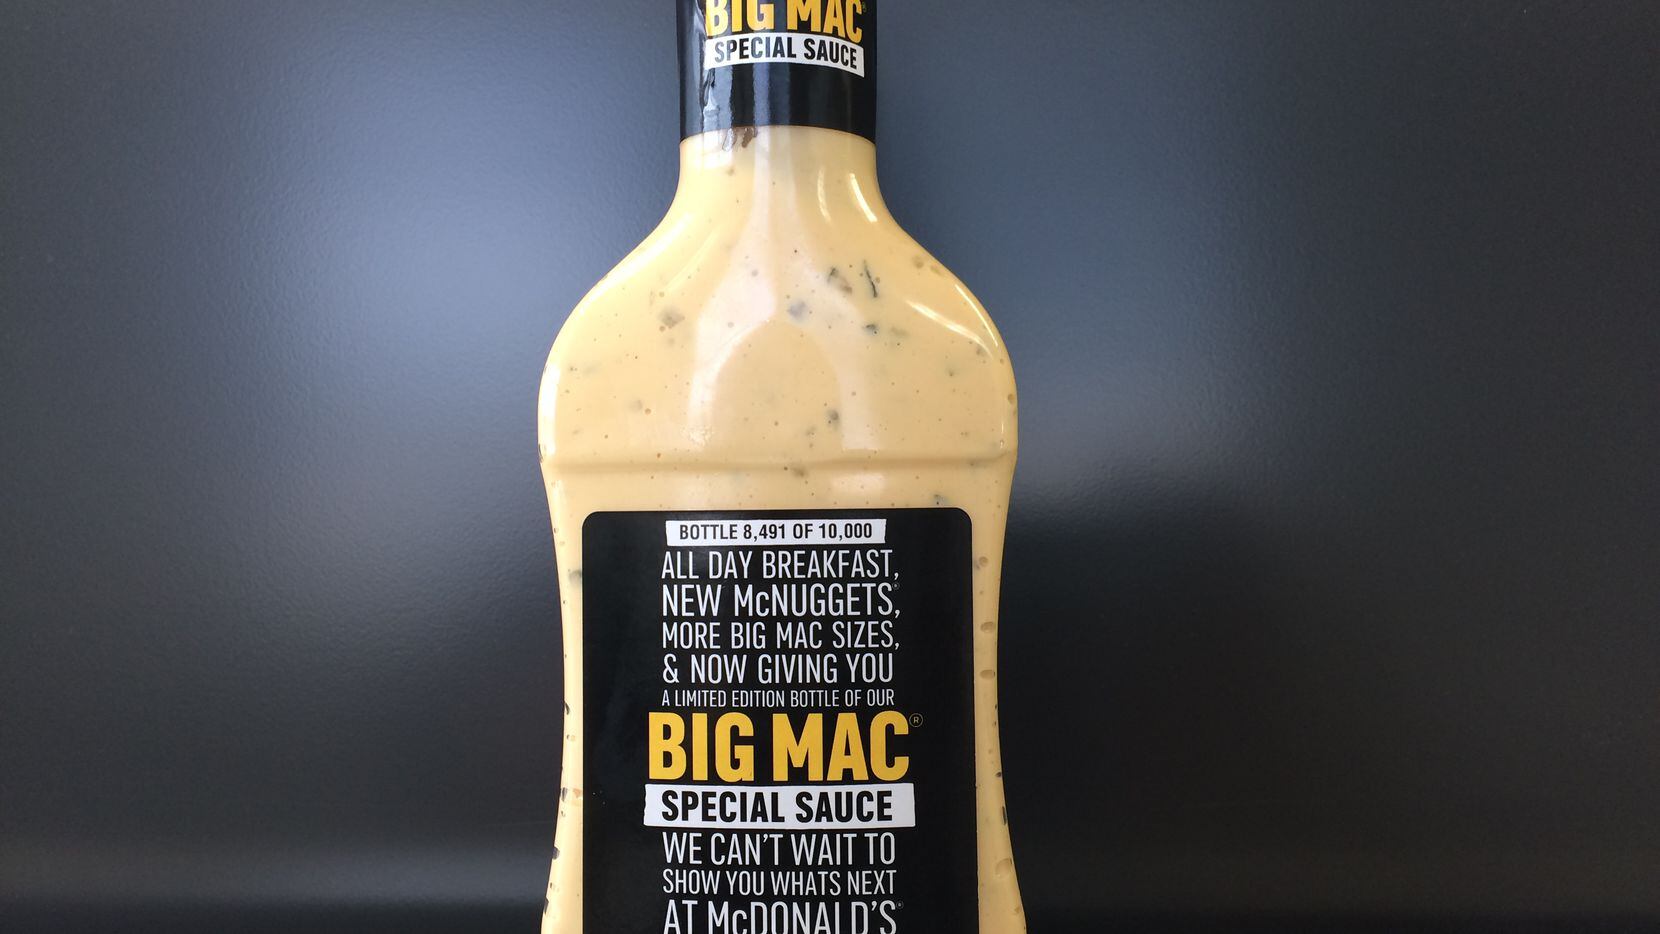 Here S Where And How You Can Score A Free Bottle Of Mcdonald S Big Mac Special Sauce,Rotisserie Chicken Gif